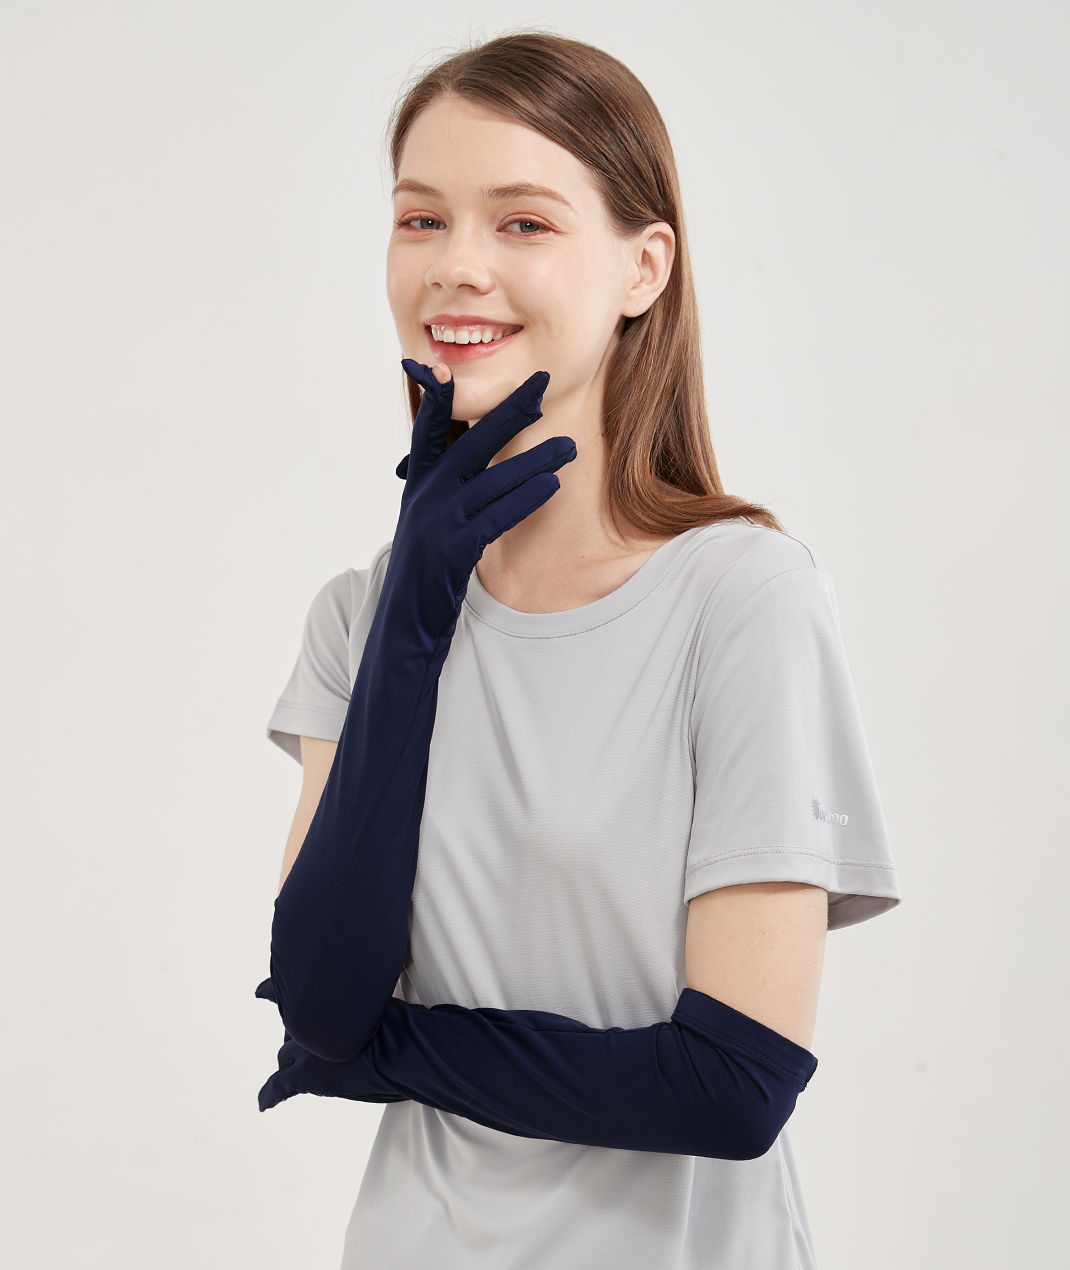 UV Cut / Cool Touch - Breathable Sleeves UPF50+